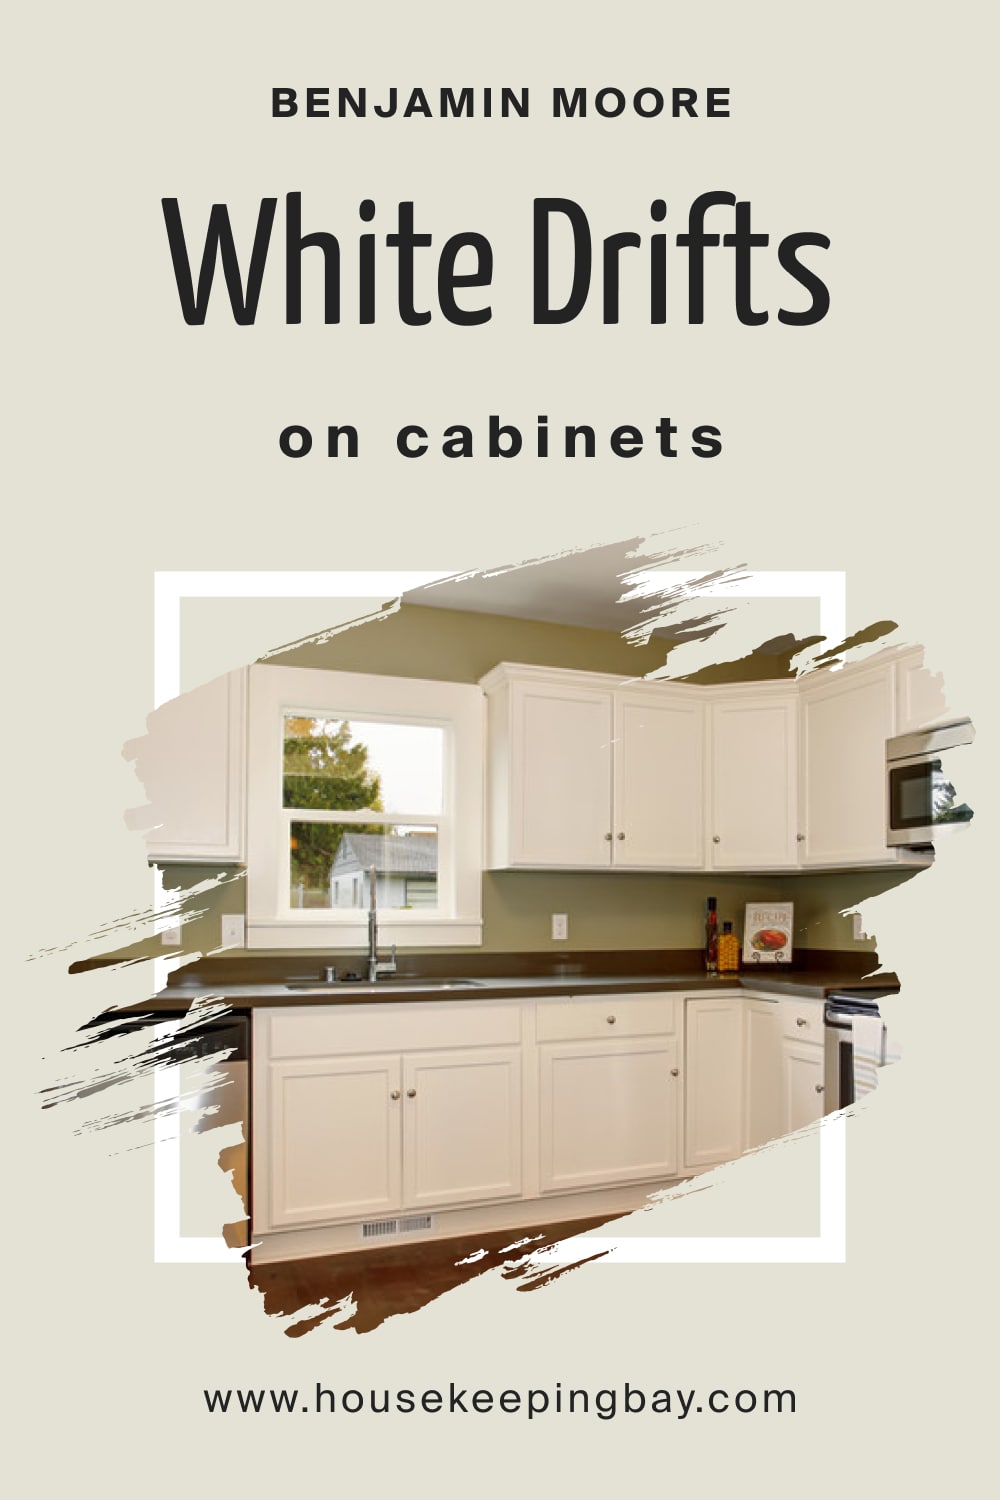 Benjamin Moore. White Drifts OC 138 On Cabinets